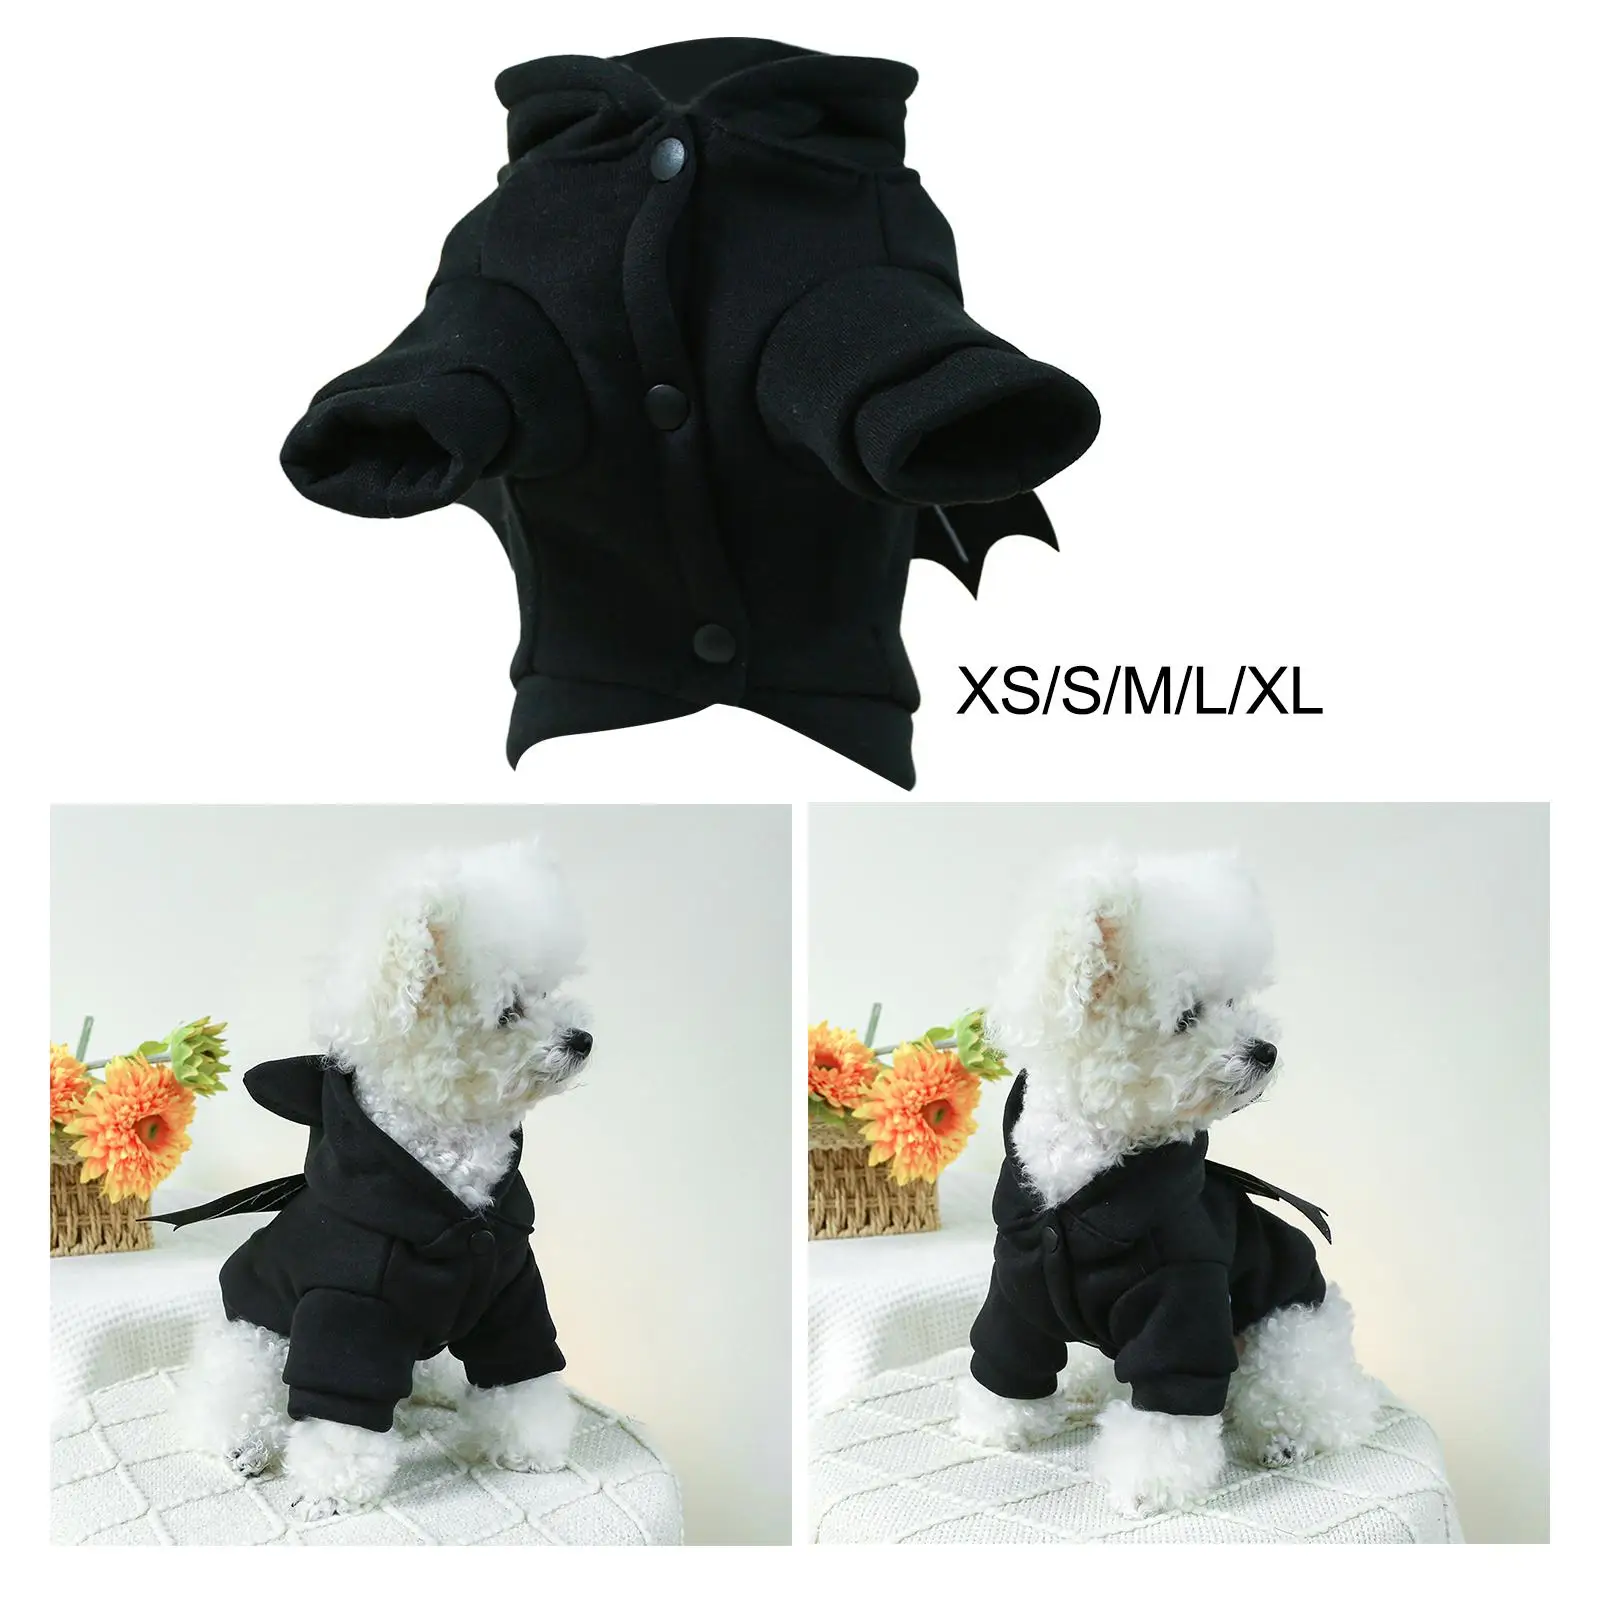 Pet Costume Cat Cosplay Halloween Dog Costume Decor Fancy Dress Pet Festival Supplies Cute Kitten Clothing for New Year Festival